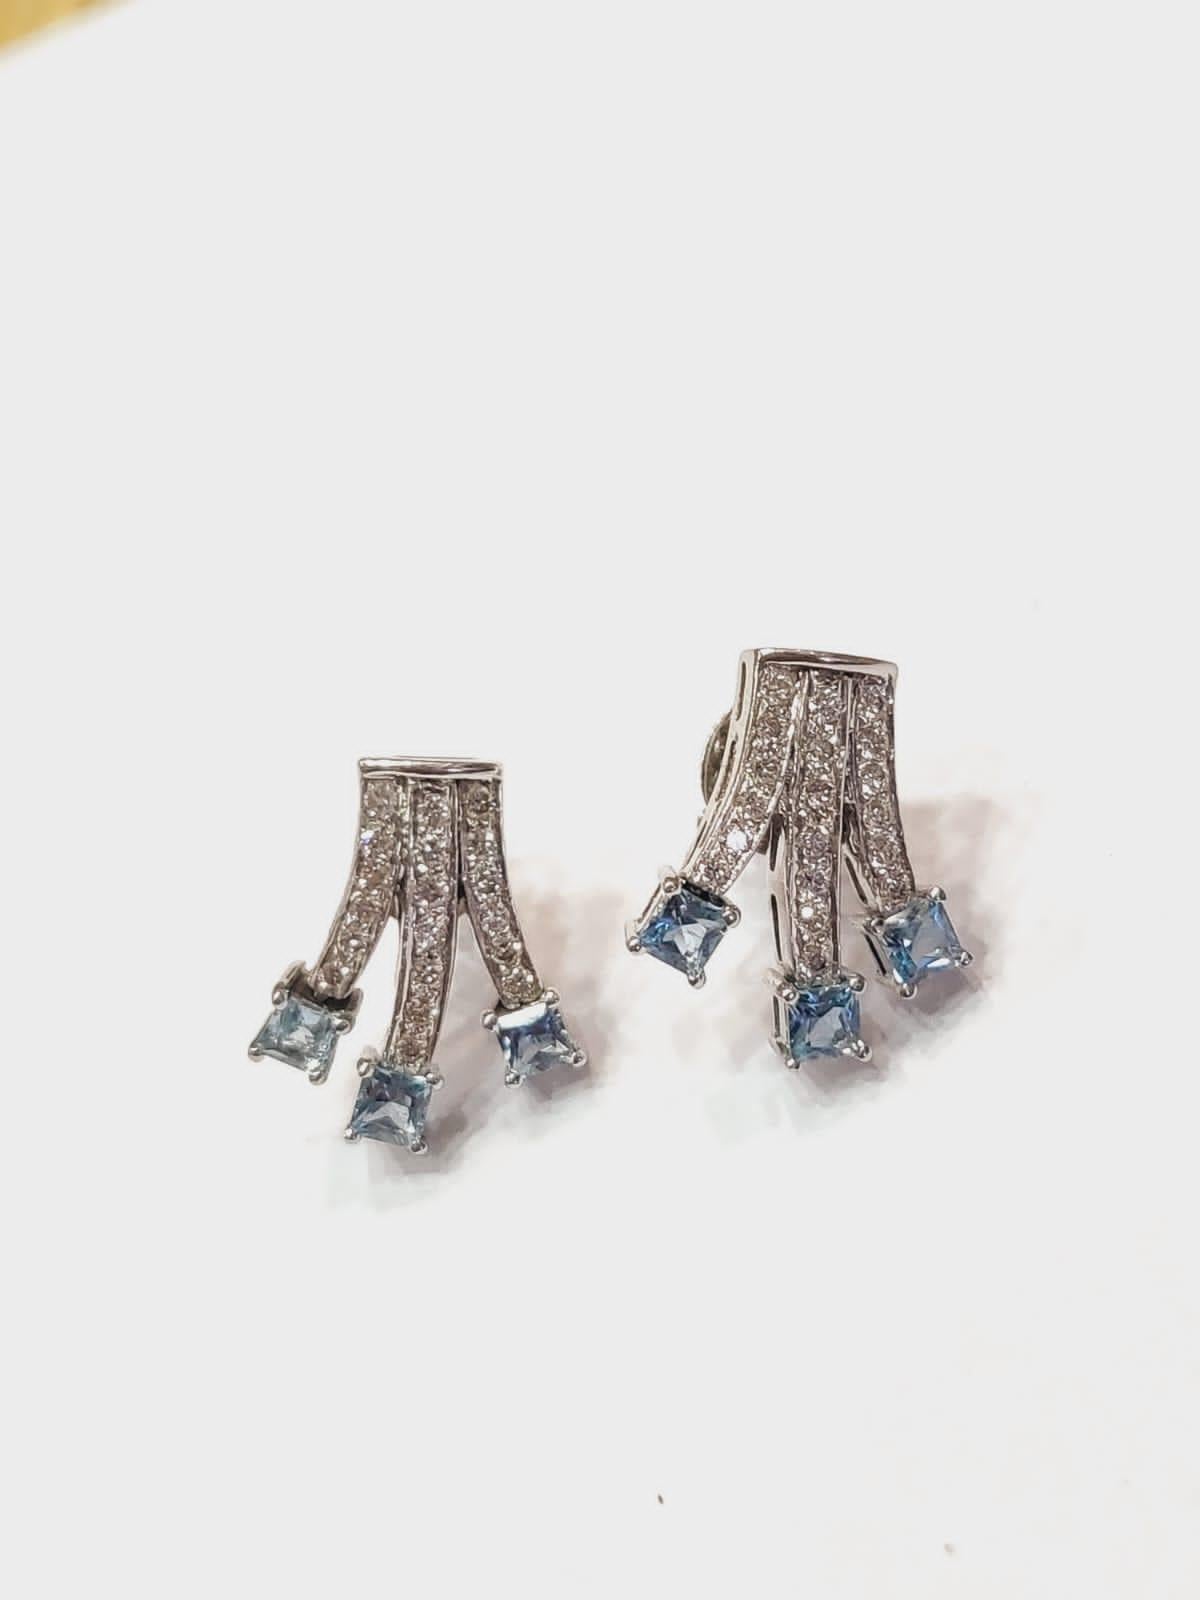 Square Cut Set in 18k White Gold, 1.82 Carats, Natural Aquamarine & Diamonds Stud Earrings For Sale